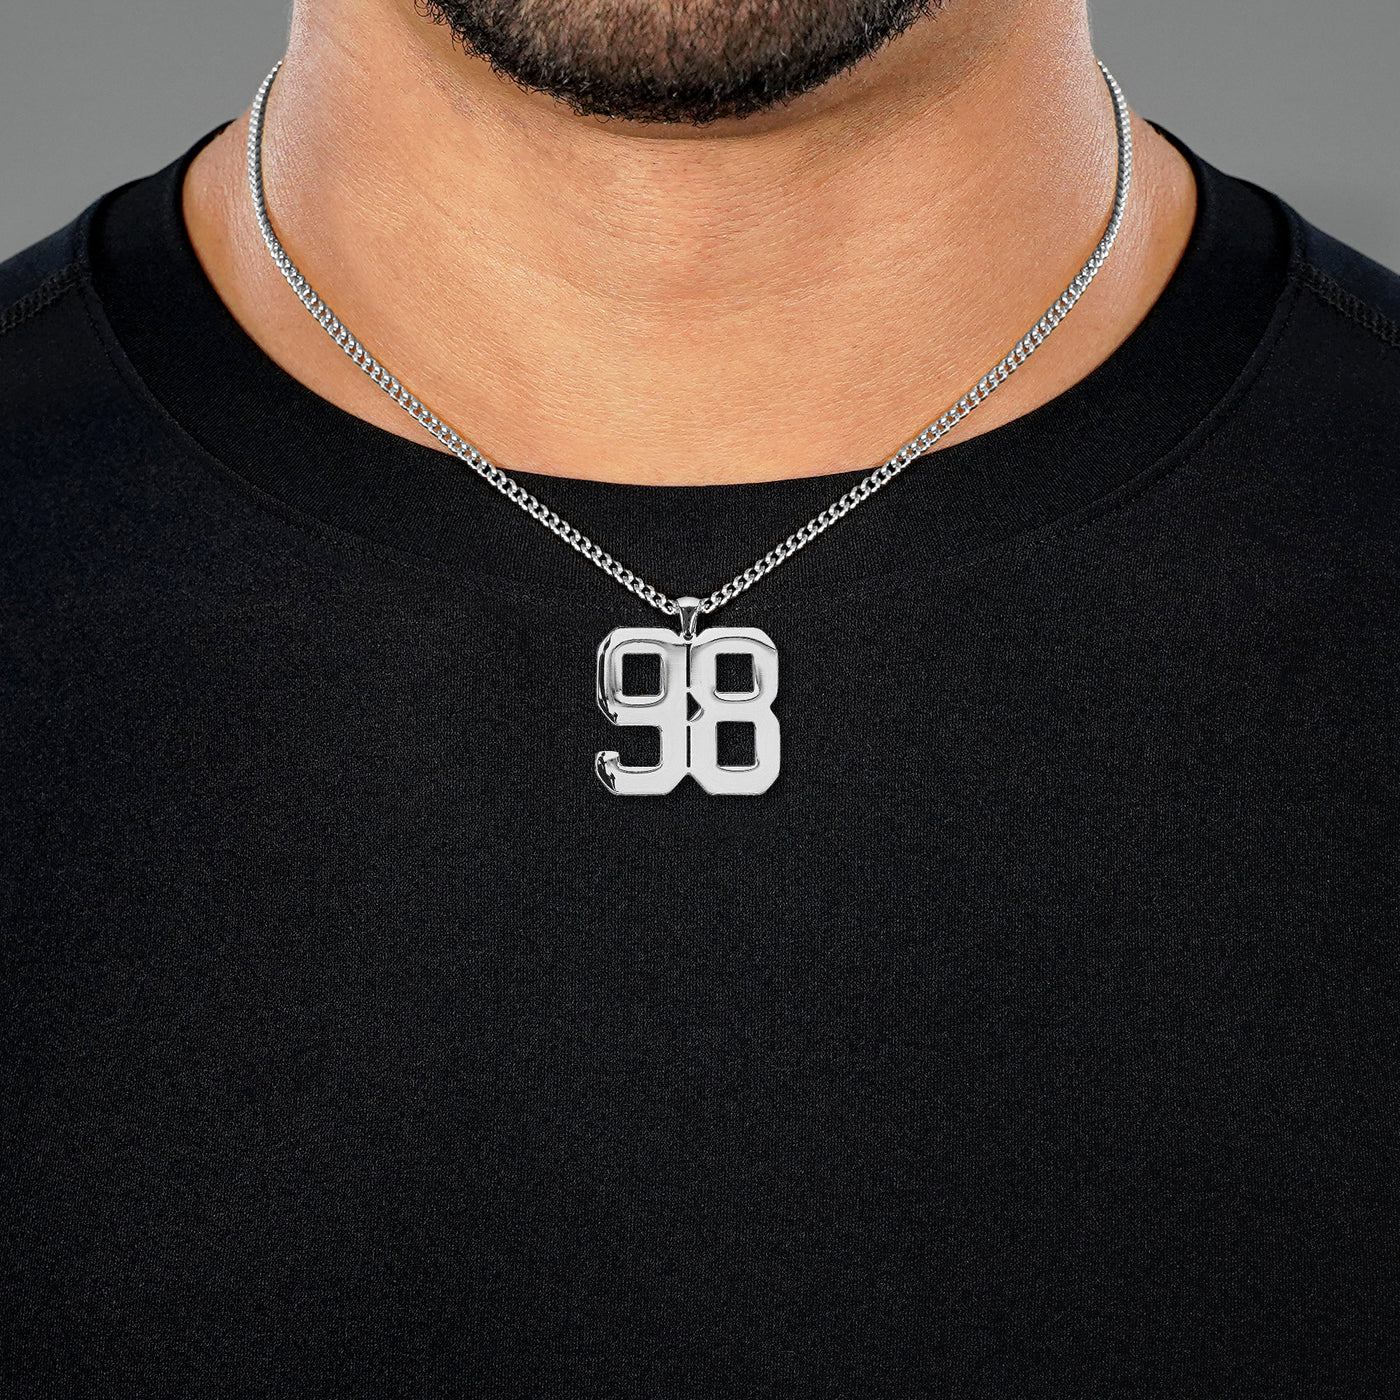 98 Number Pendant with Chain Necklace - Stainless Steel